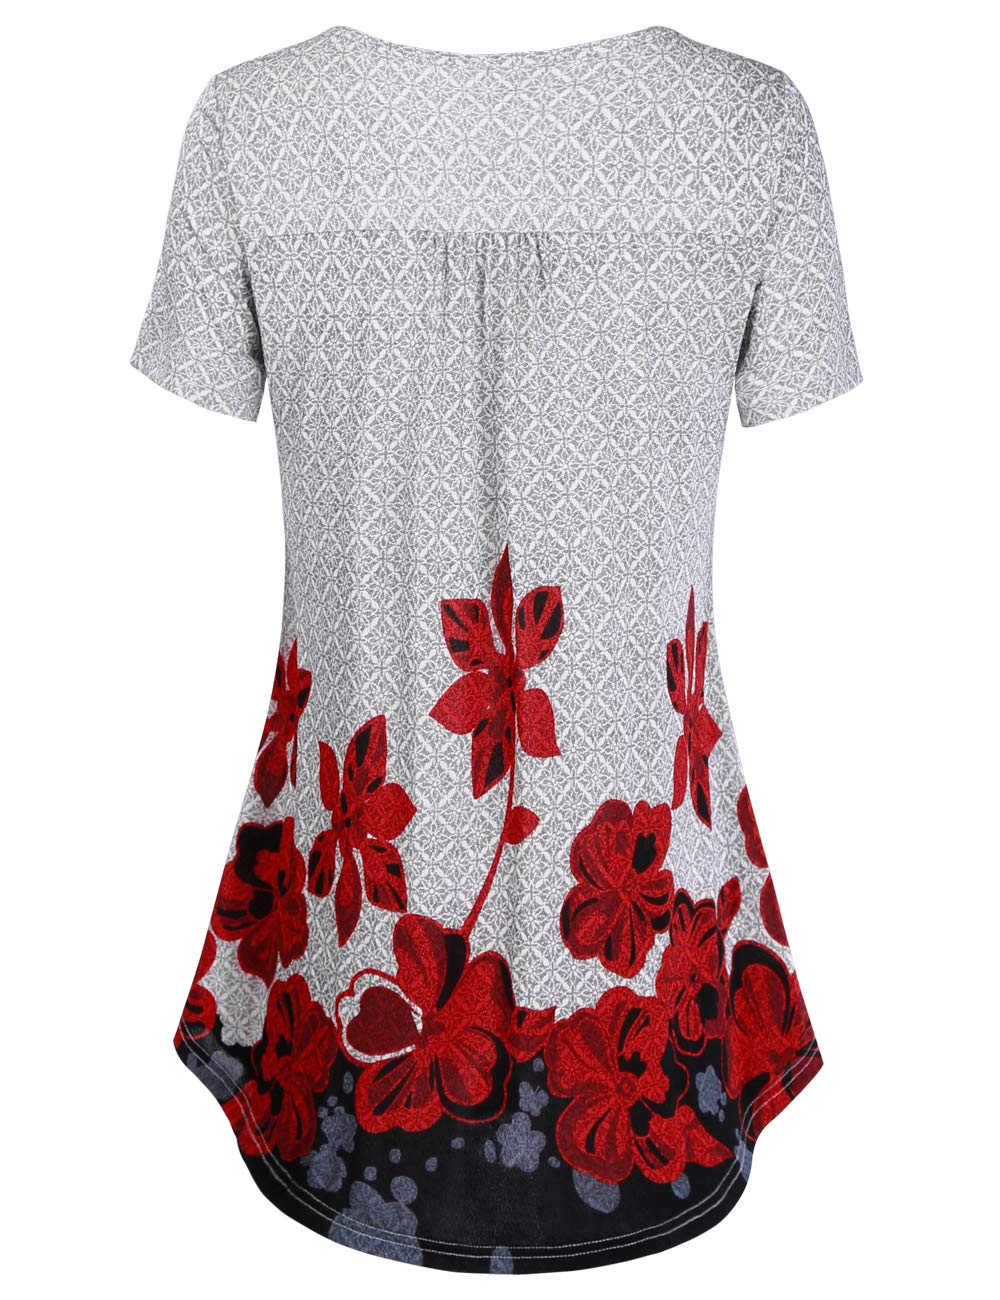 BAISHENGGT White Red Floral Women's V Neck Buttons Pleated Flared Comfy Tunic Tops